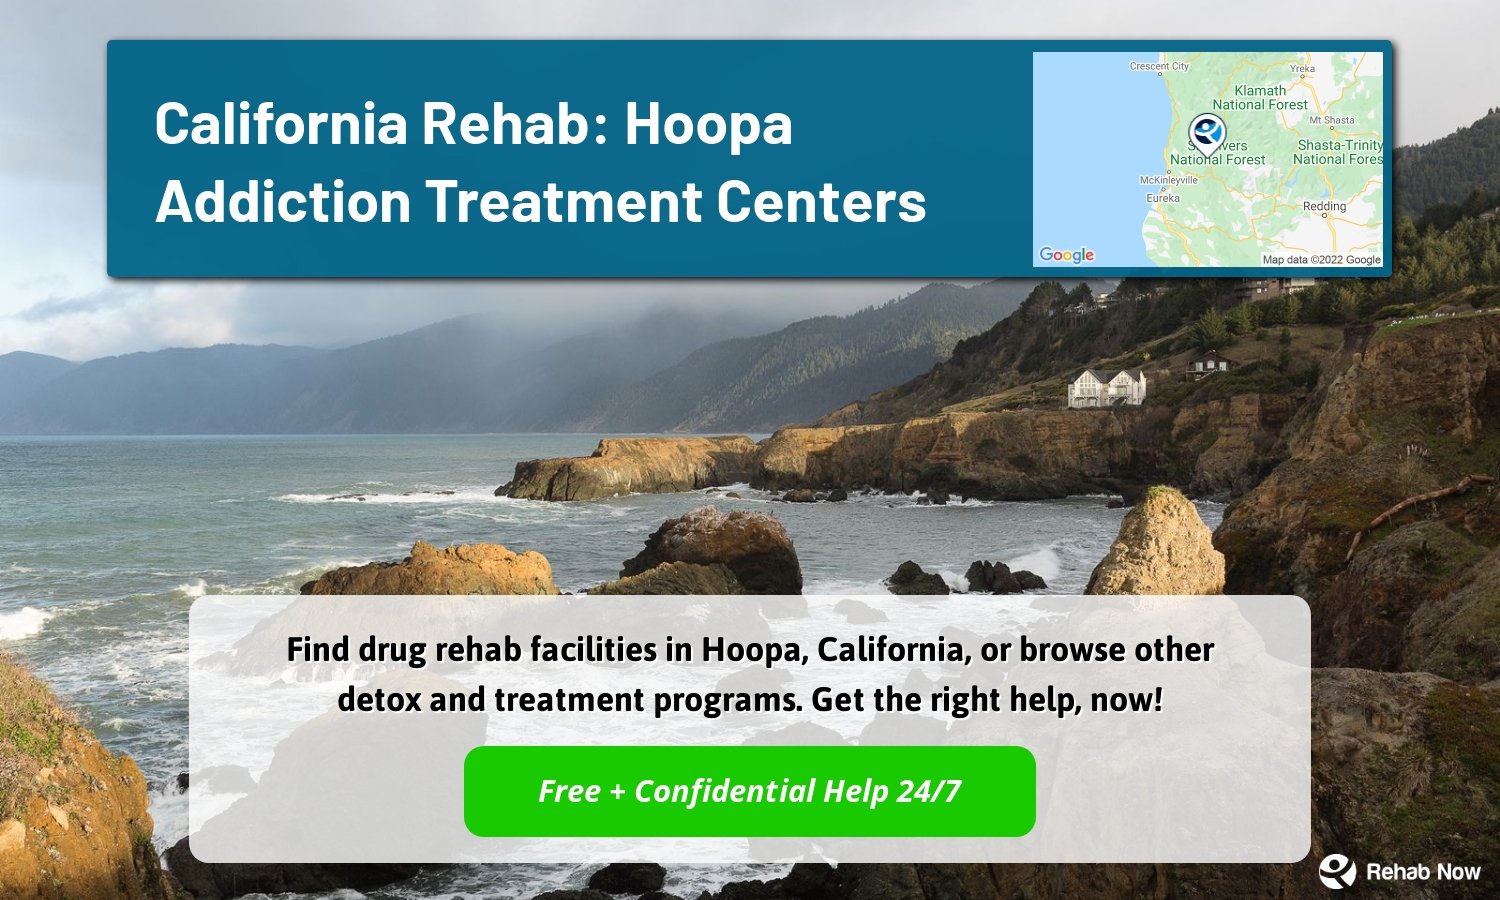 Find drug rehab facilities in Hoopa, California, or browse other detox and treatment programs. Get the right help, now!